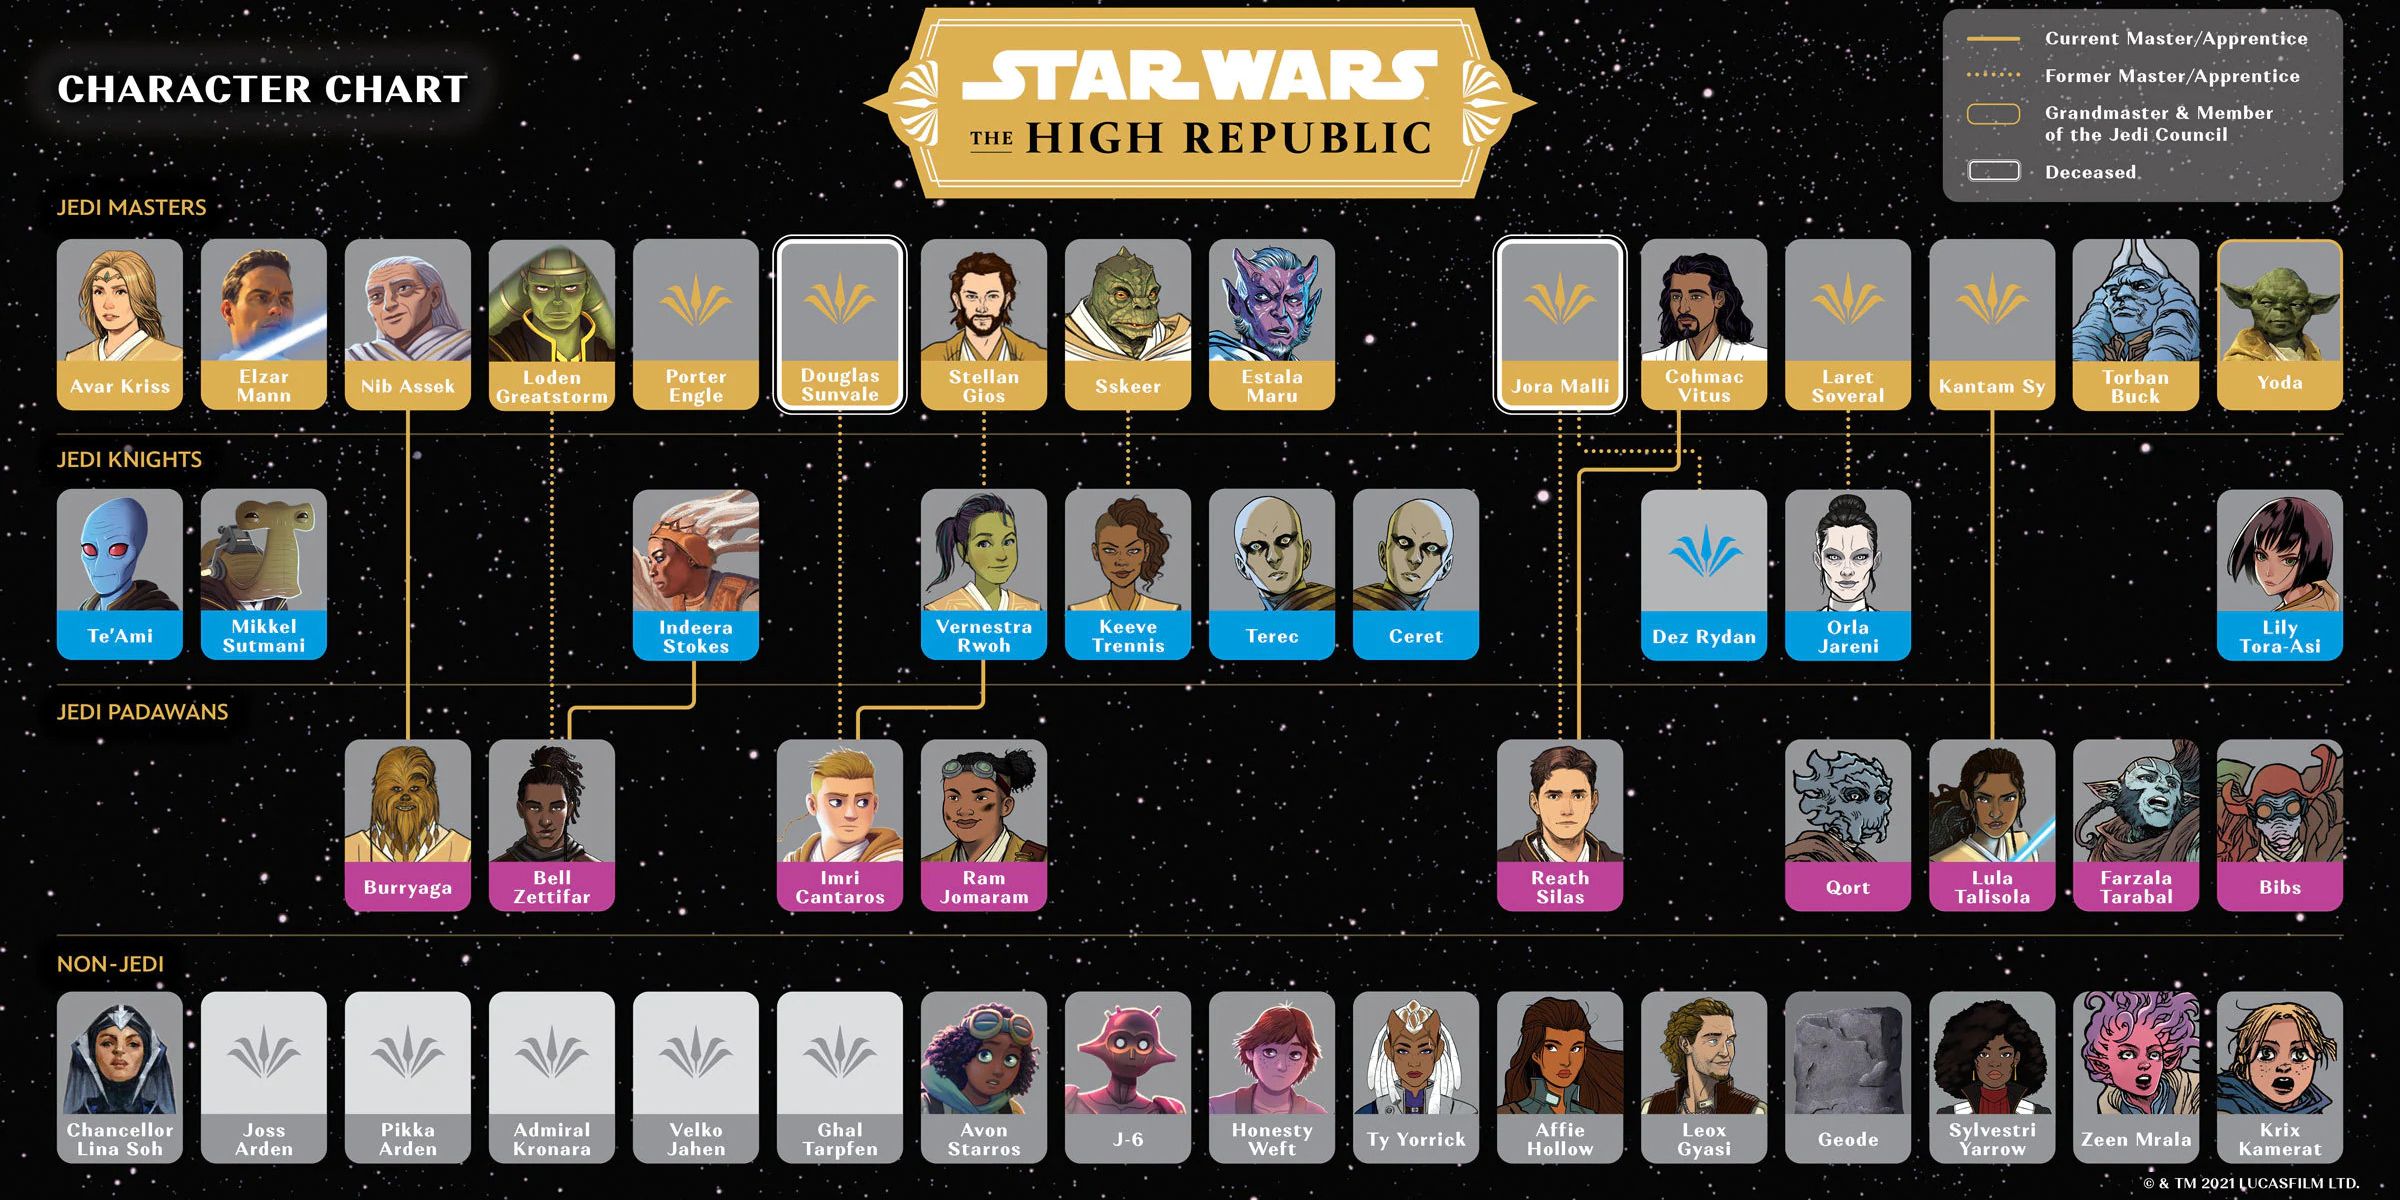 An image detailing many major characters and their ranks in the High Republic